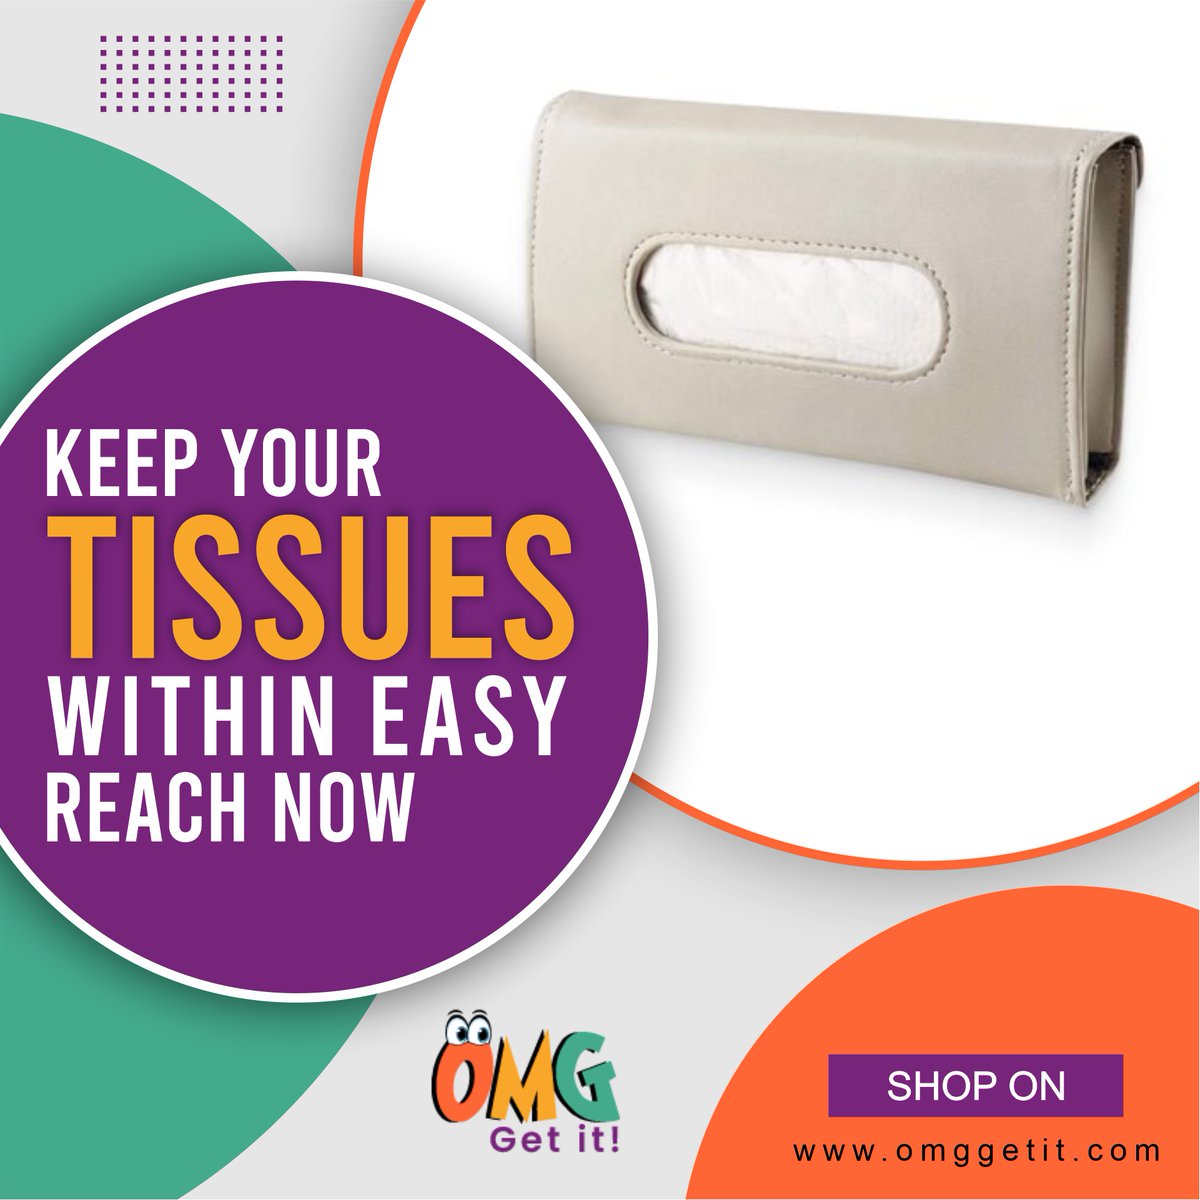 Ever get into someone’s car and see a tissue box that’s all beaten up? Avoid that and be protected.

🛍️ bit.ly/3FfieHj
.
#omggetit #tissuebox #tempattissue #tempattisu